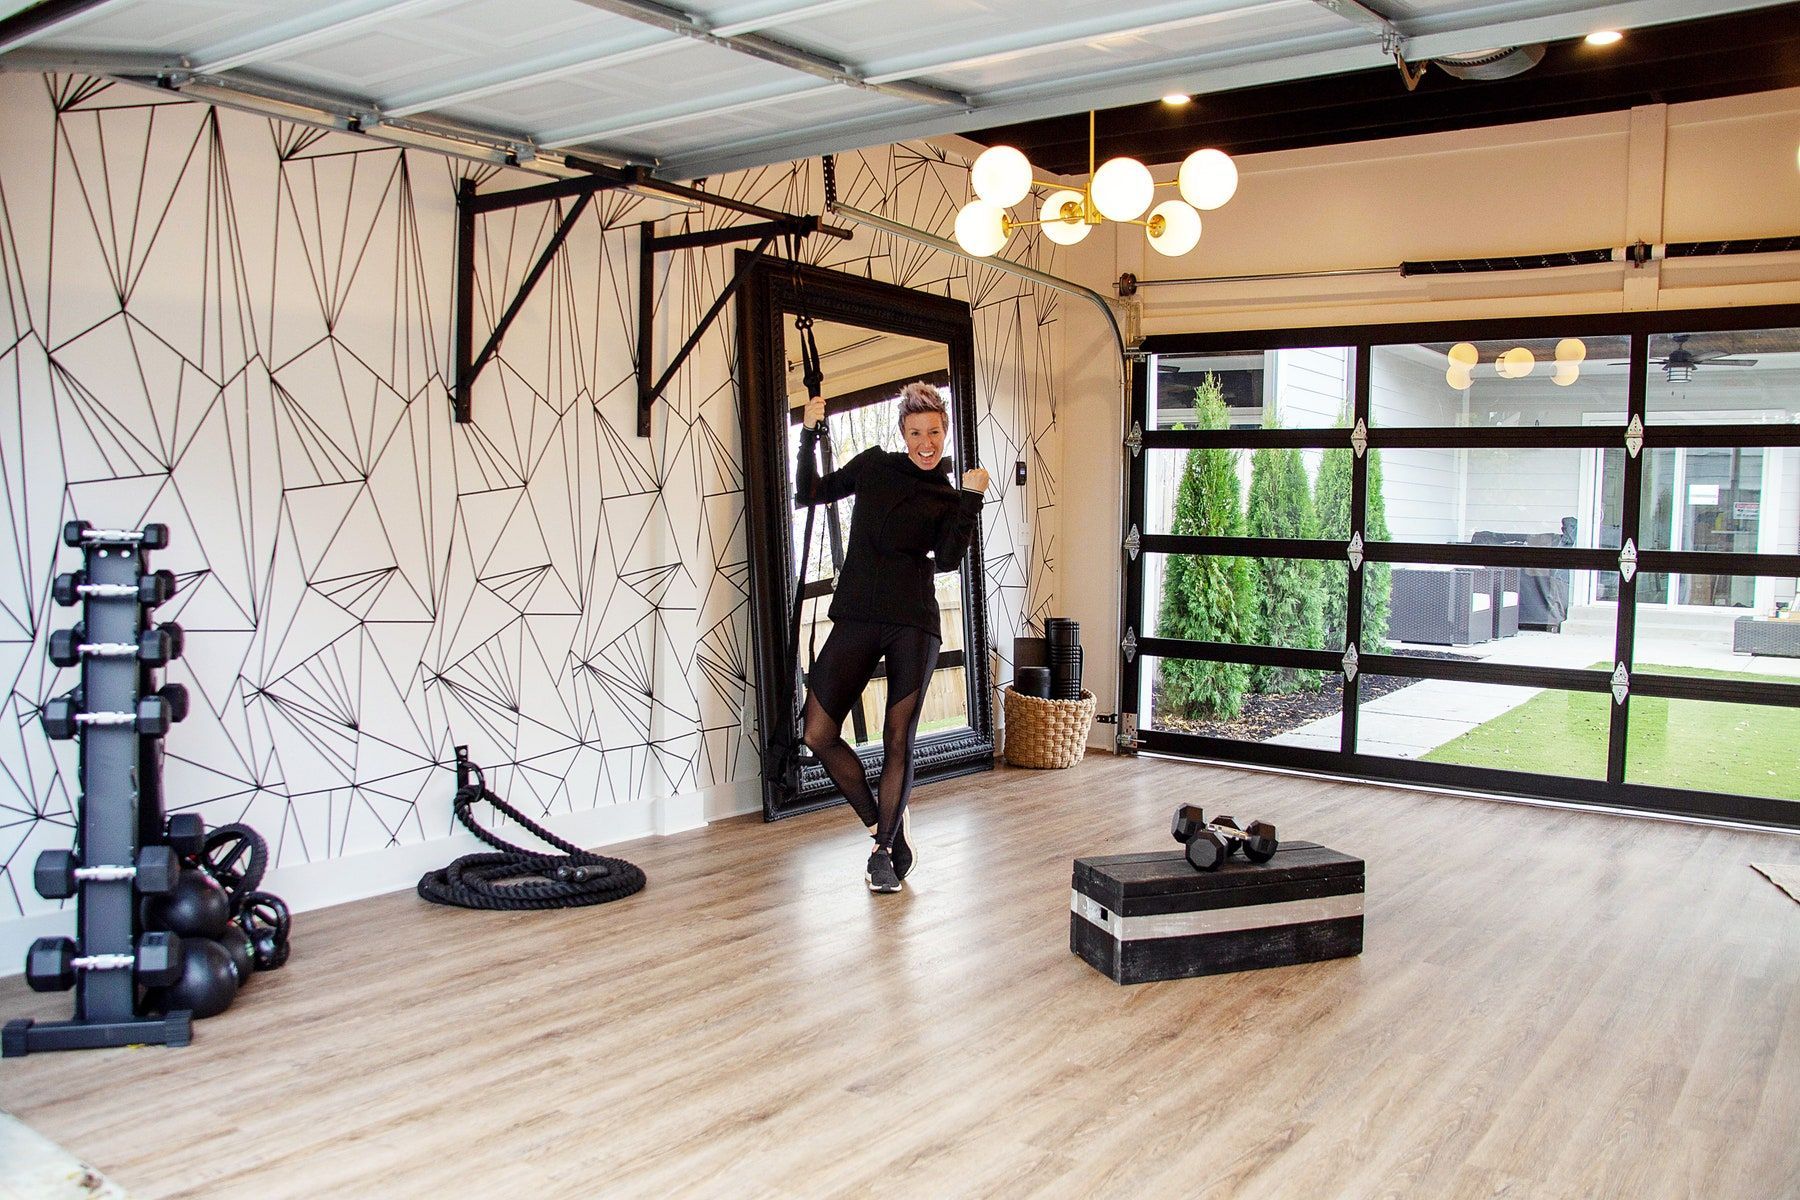 Build a Budget-Friendly At-Home Gym With These Tips From Celebrity Trainer Erin Oprea | SELF - Build a Budget-Friendly At-Home Gym With These Tips From Celebrity Trainer Erin Oprea | SELF -   16 home fitness Room ideas